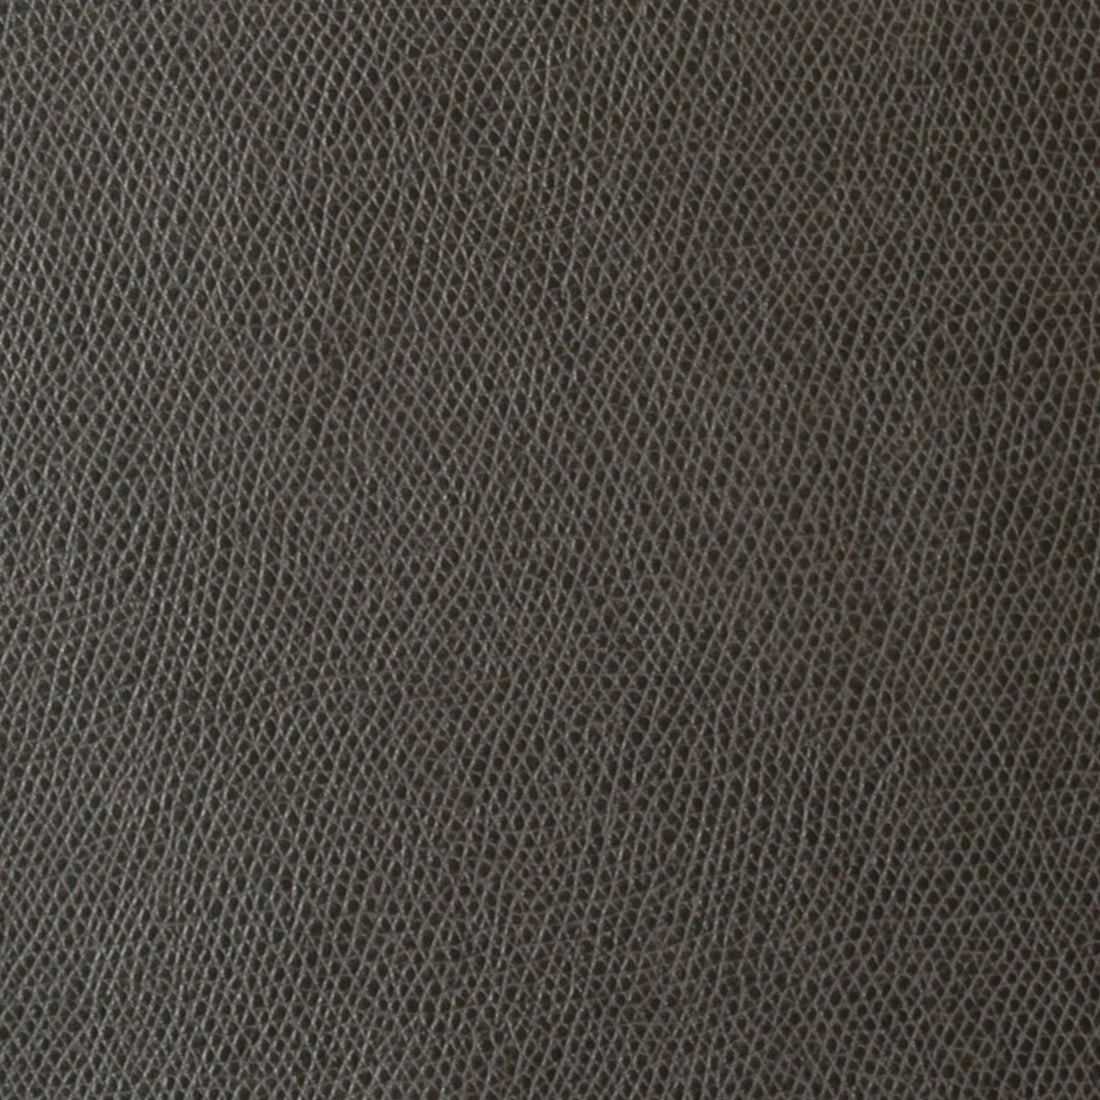 Ophidian fabric in charcoal color - pattern OPHIDIAN.6.0 - by Kravet Contract in the Sta-Kleen collection